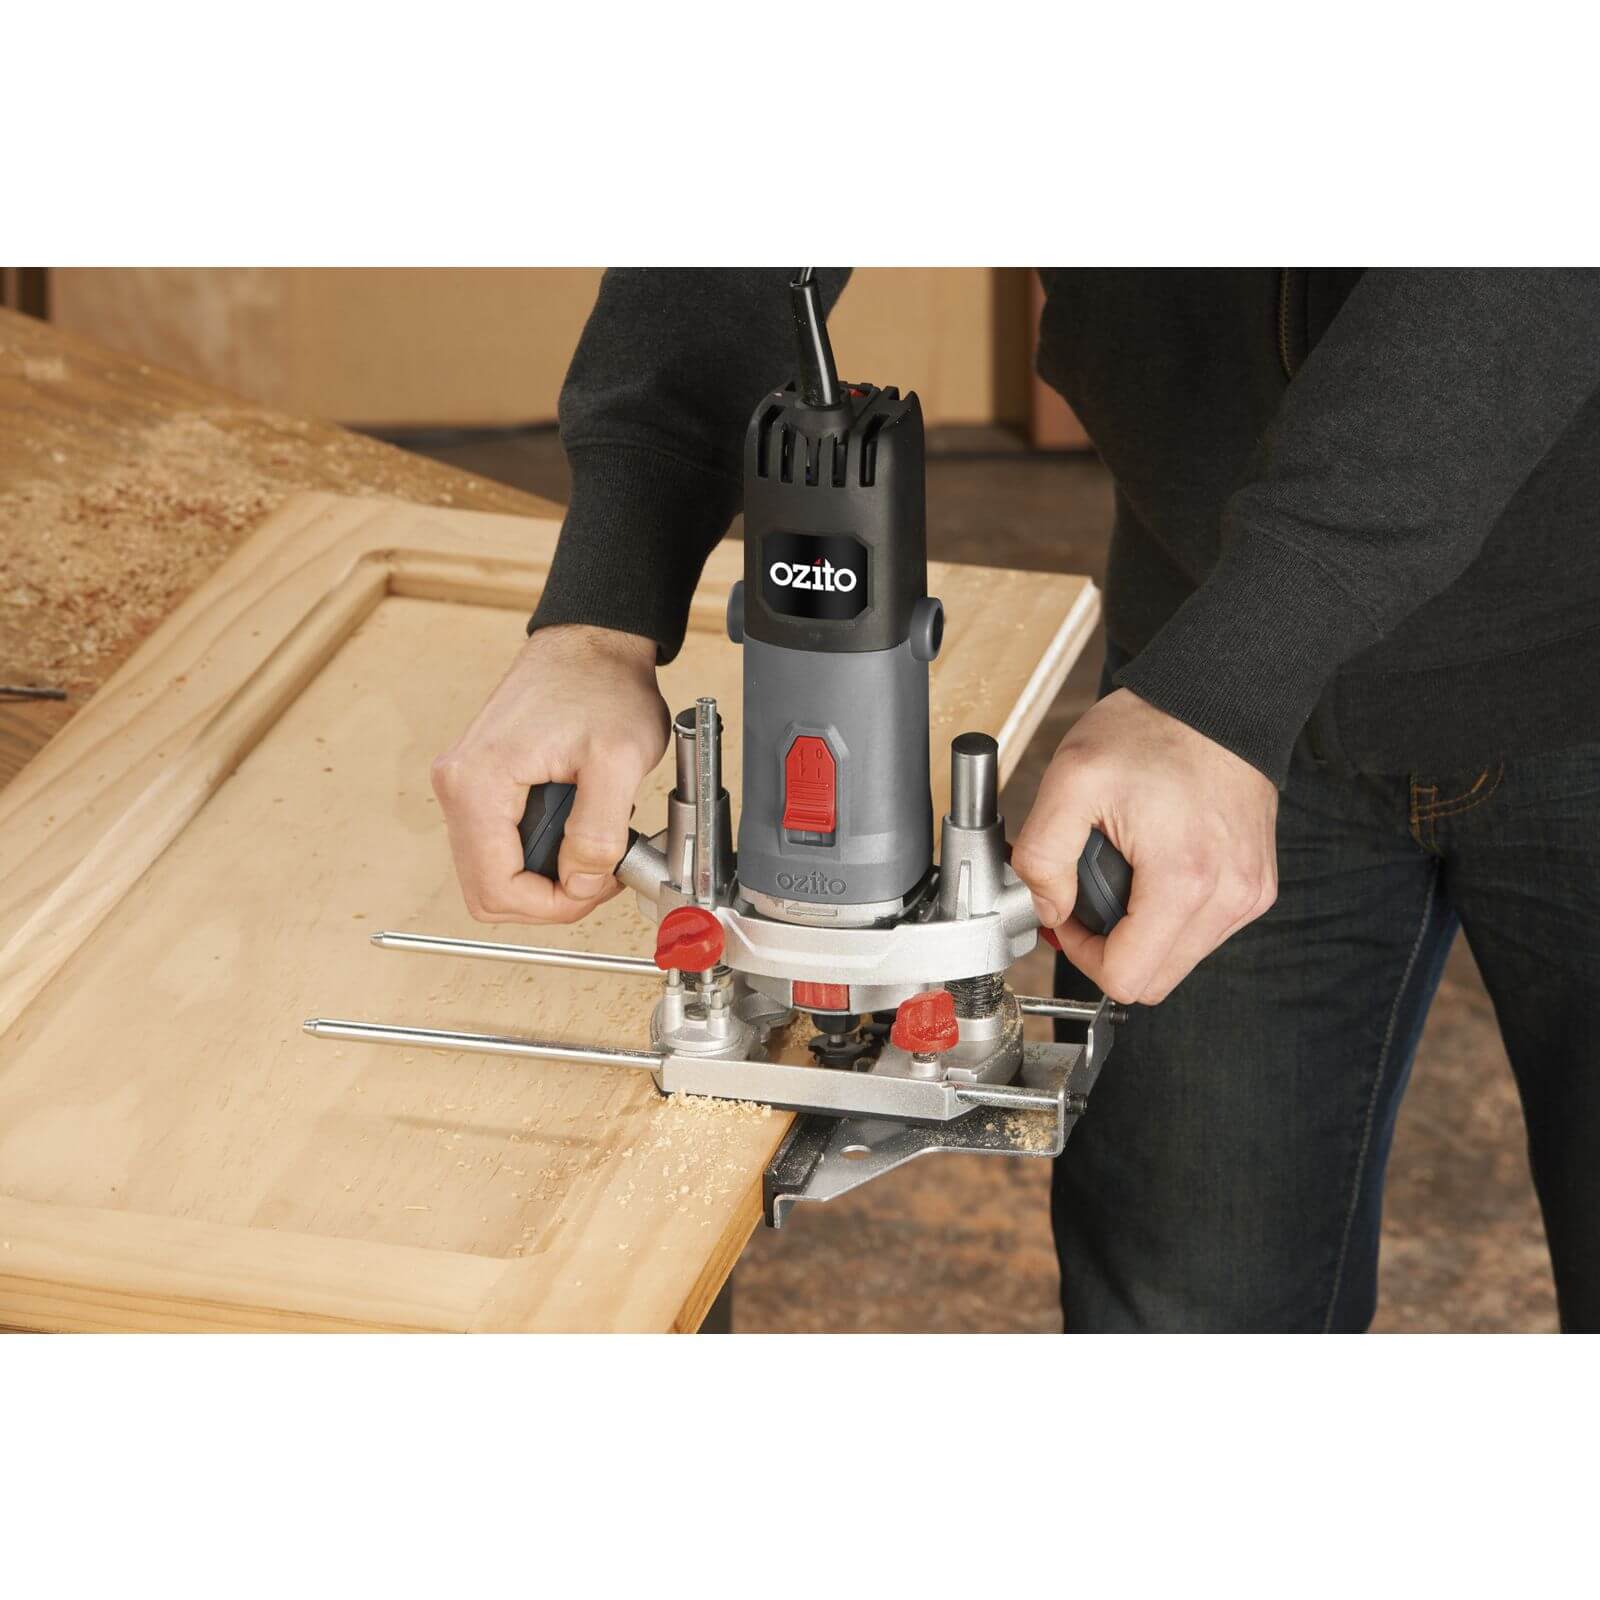 Ozito by Einhell 850W Router